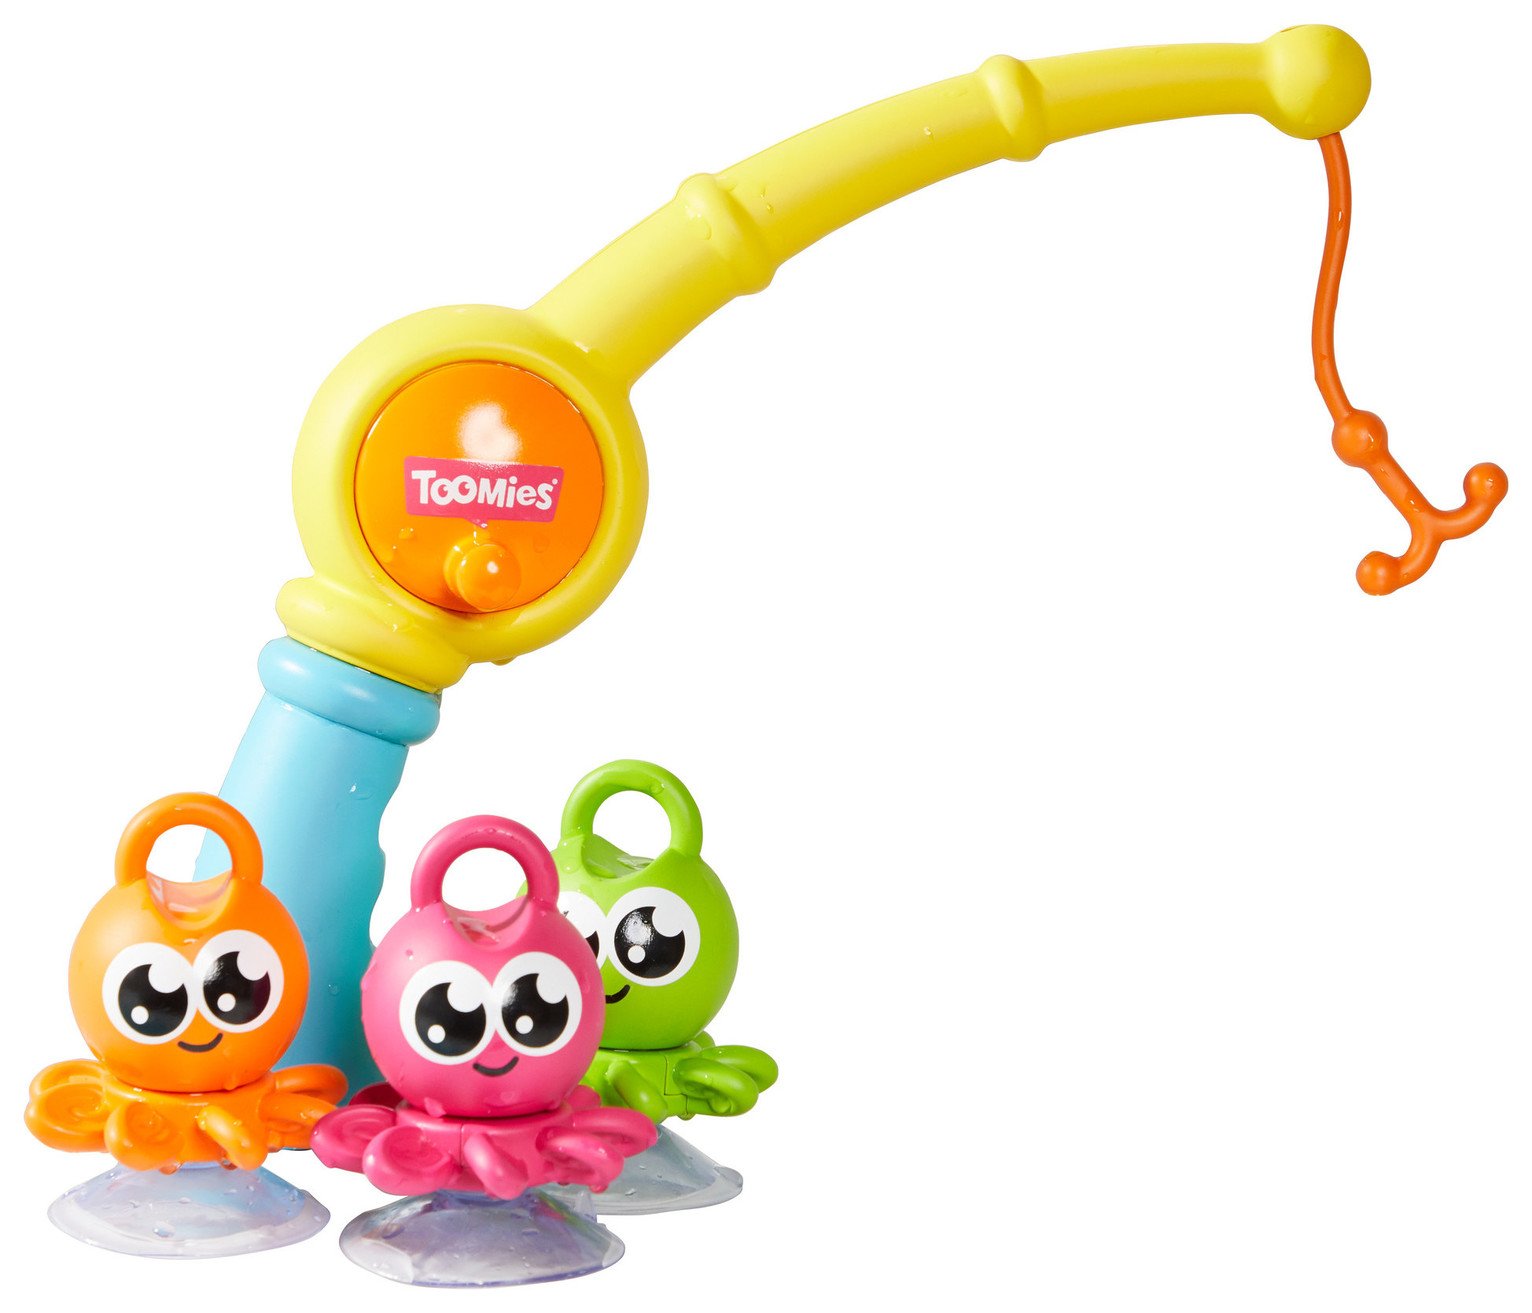 Tomy Toomies 3 In 1 Fishing Frenzy review